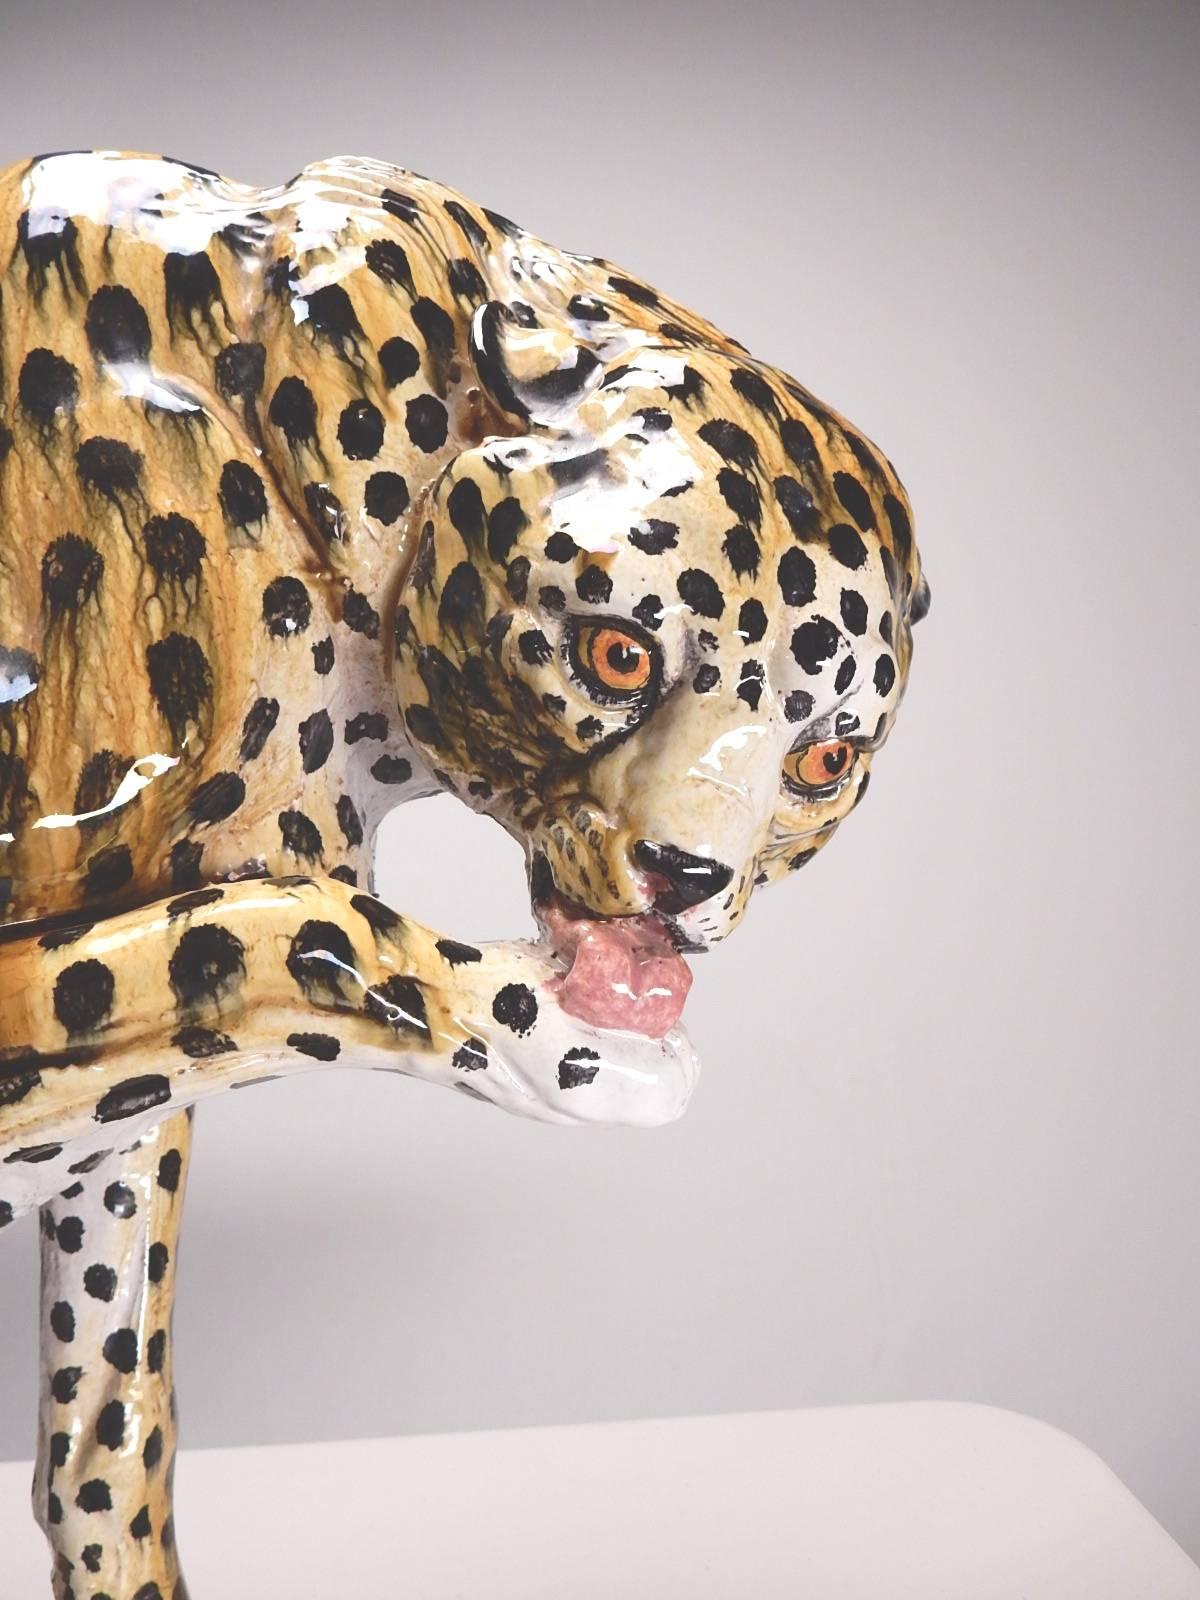 Hand-painted Italian ceramic cheetah floor sculpture mounted on a wood plinth, circa 1960s.
Exotic home decor. Incredible detail.